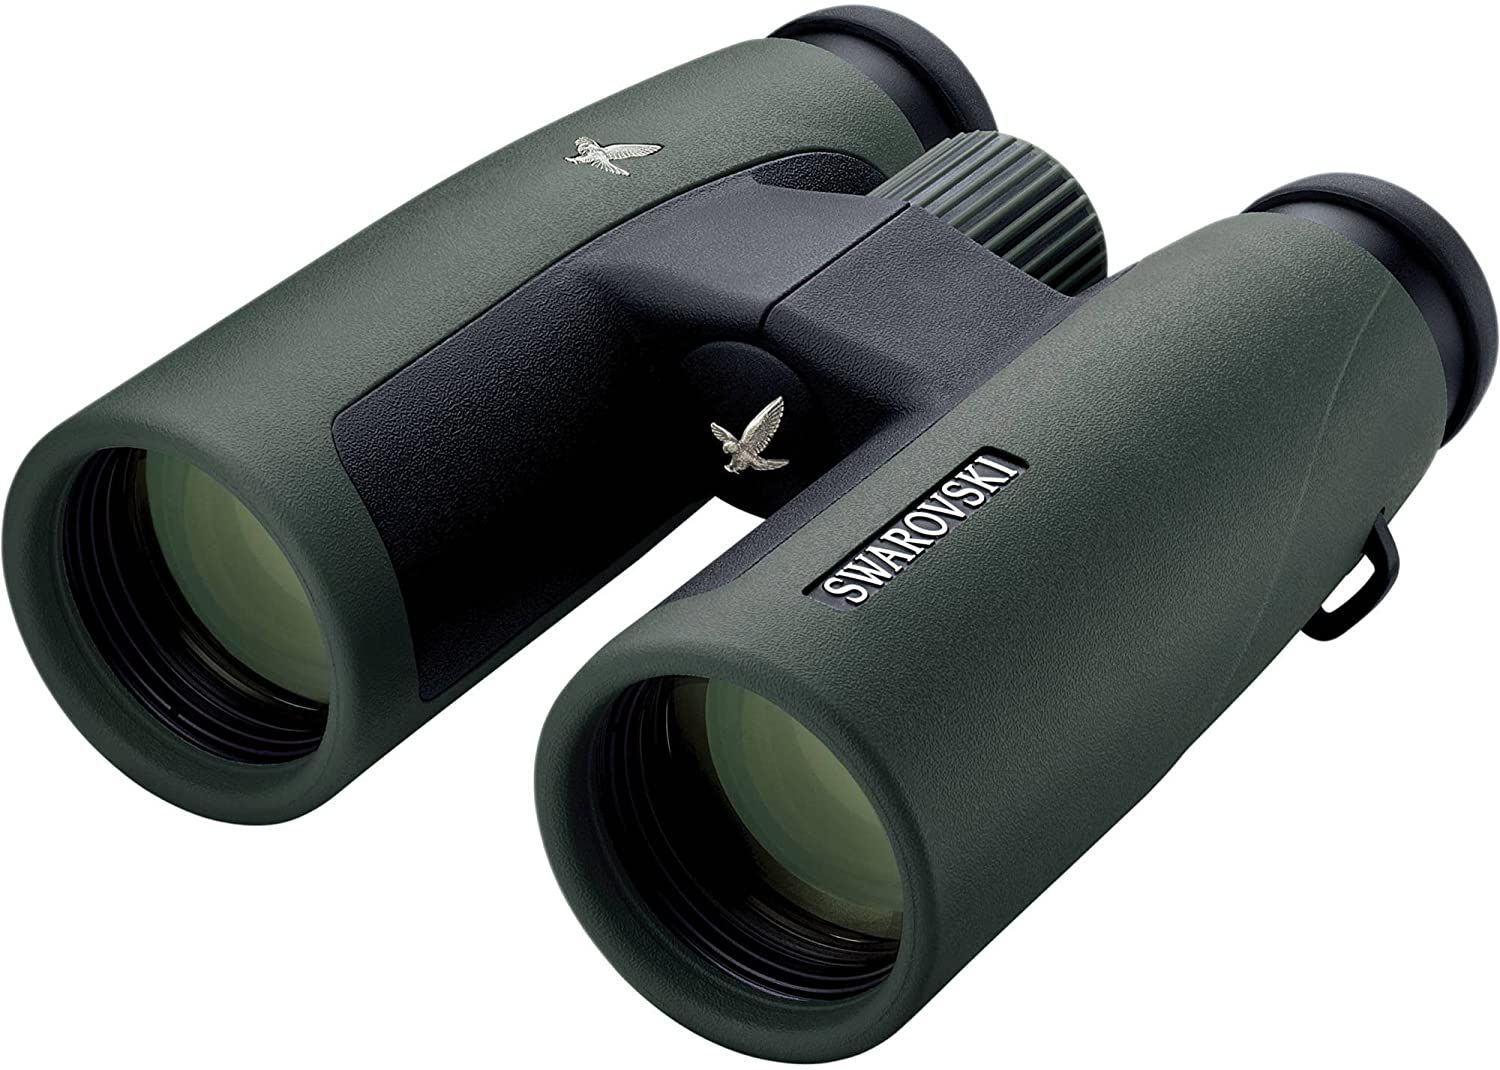 SLC 8x56 Premium Binoculars - Product Photo 3 - Close up, front view of the binoculars with the optics visible